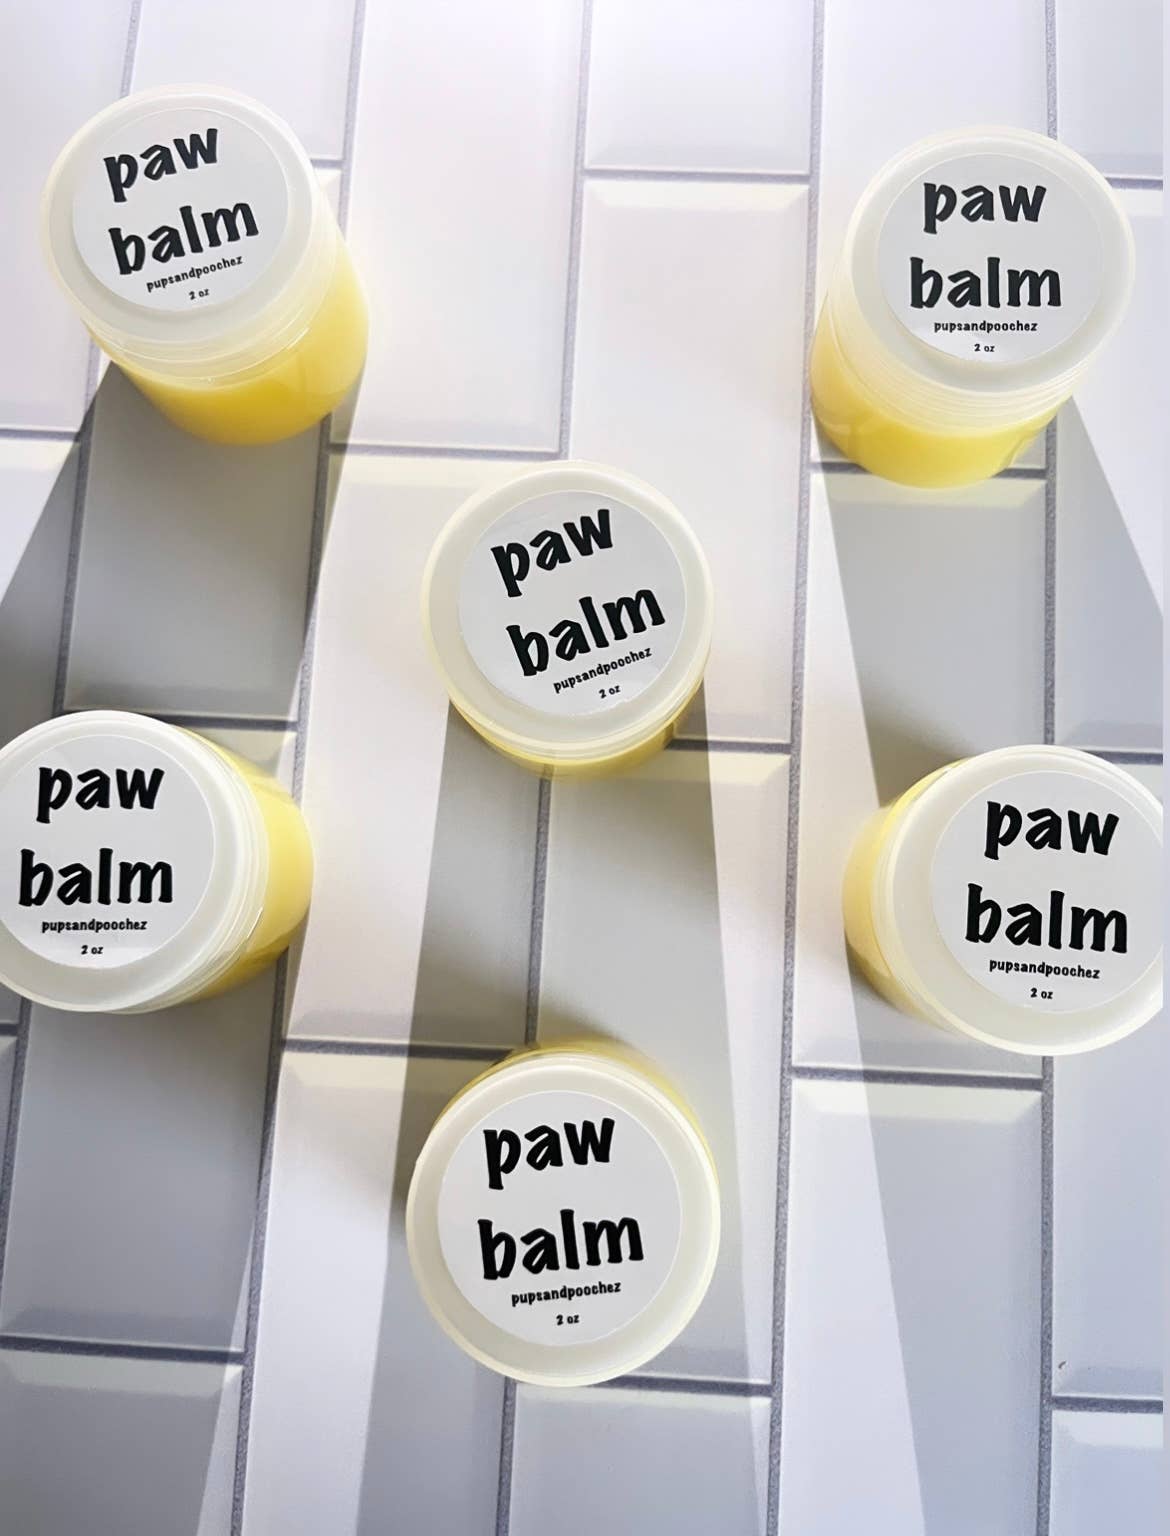 pups and poochez - Paw Balm for Dogs - All-Natural & Organic Dog Care